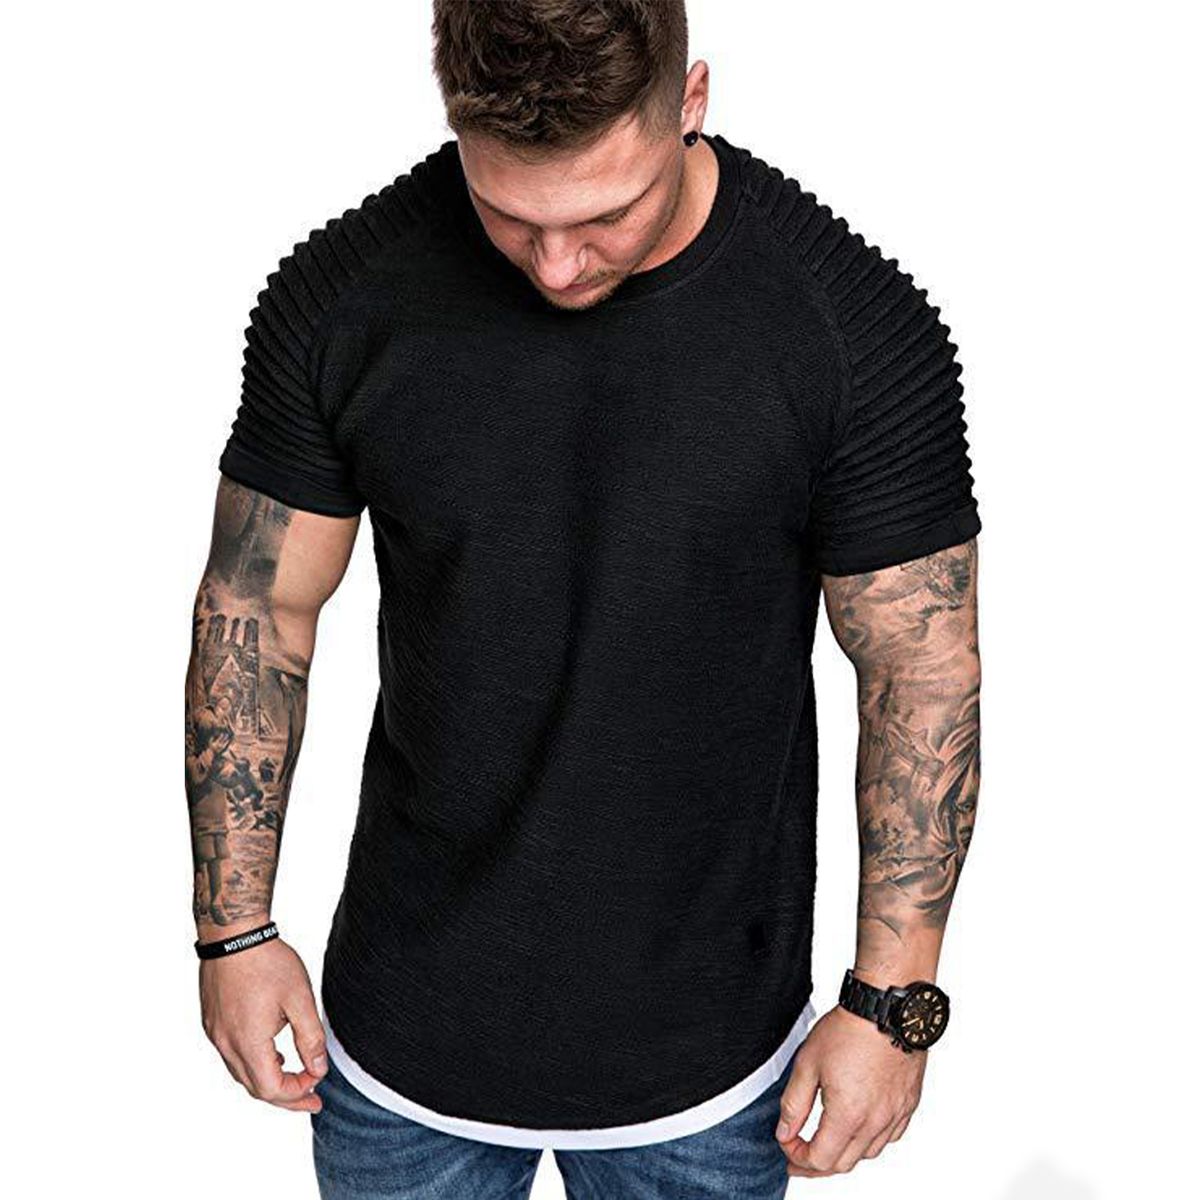 Men Short Sleeve T Shirt Wrinkled Casual Blouse Tops Summer Muscle ...